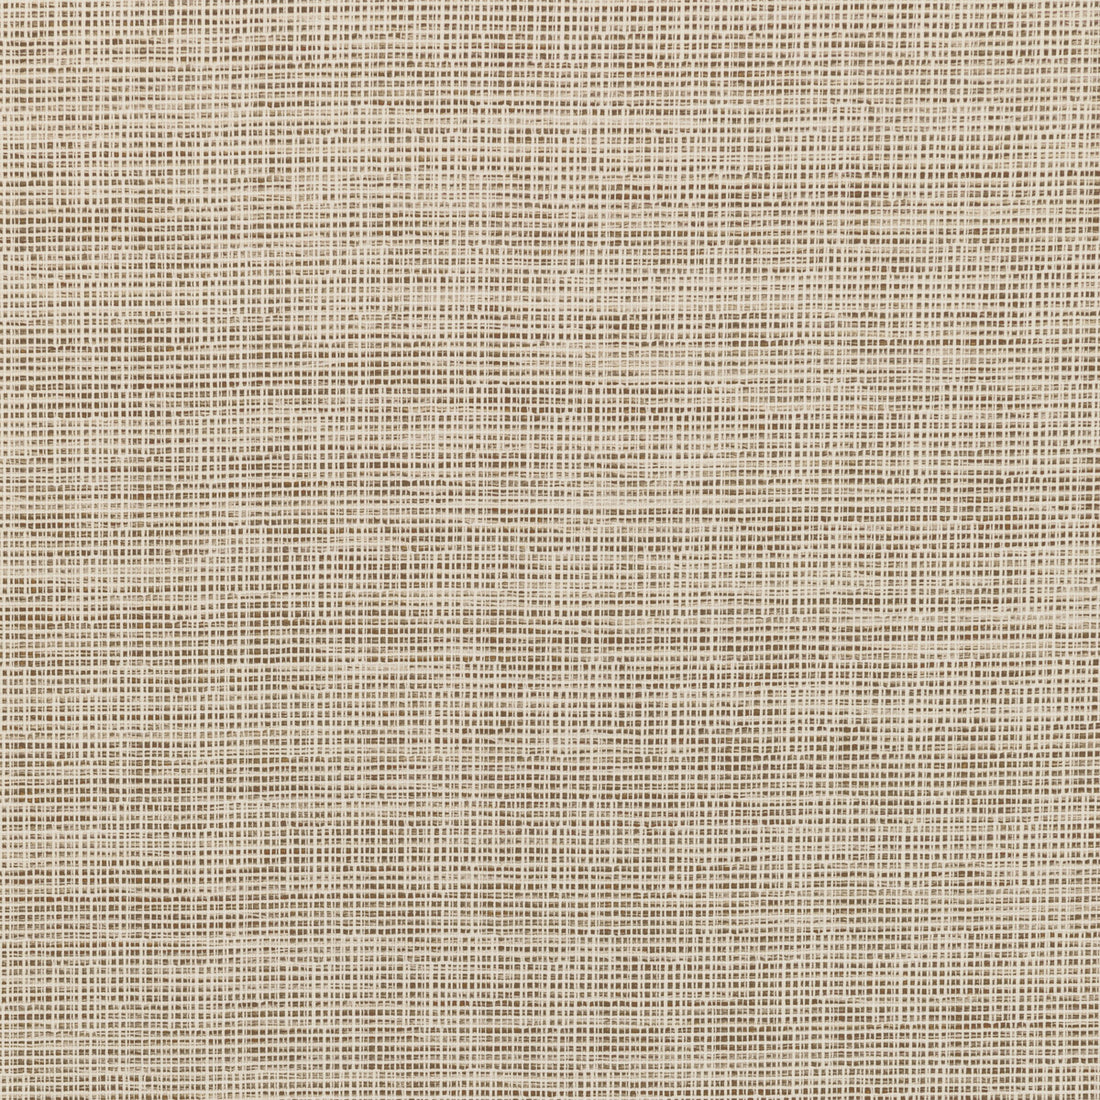 Kravet Smart fabric in 36303-616 color - pattern 36303.616.0 - by Kravet Smart in the Performance Crypton Home collection